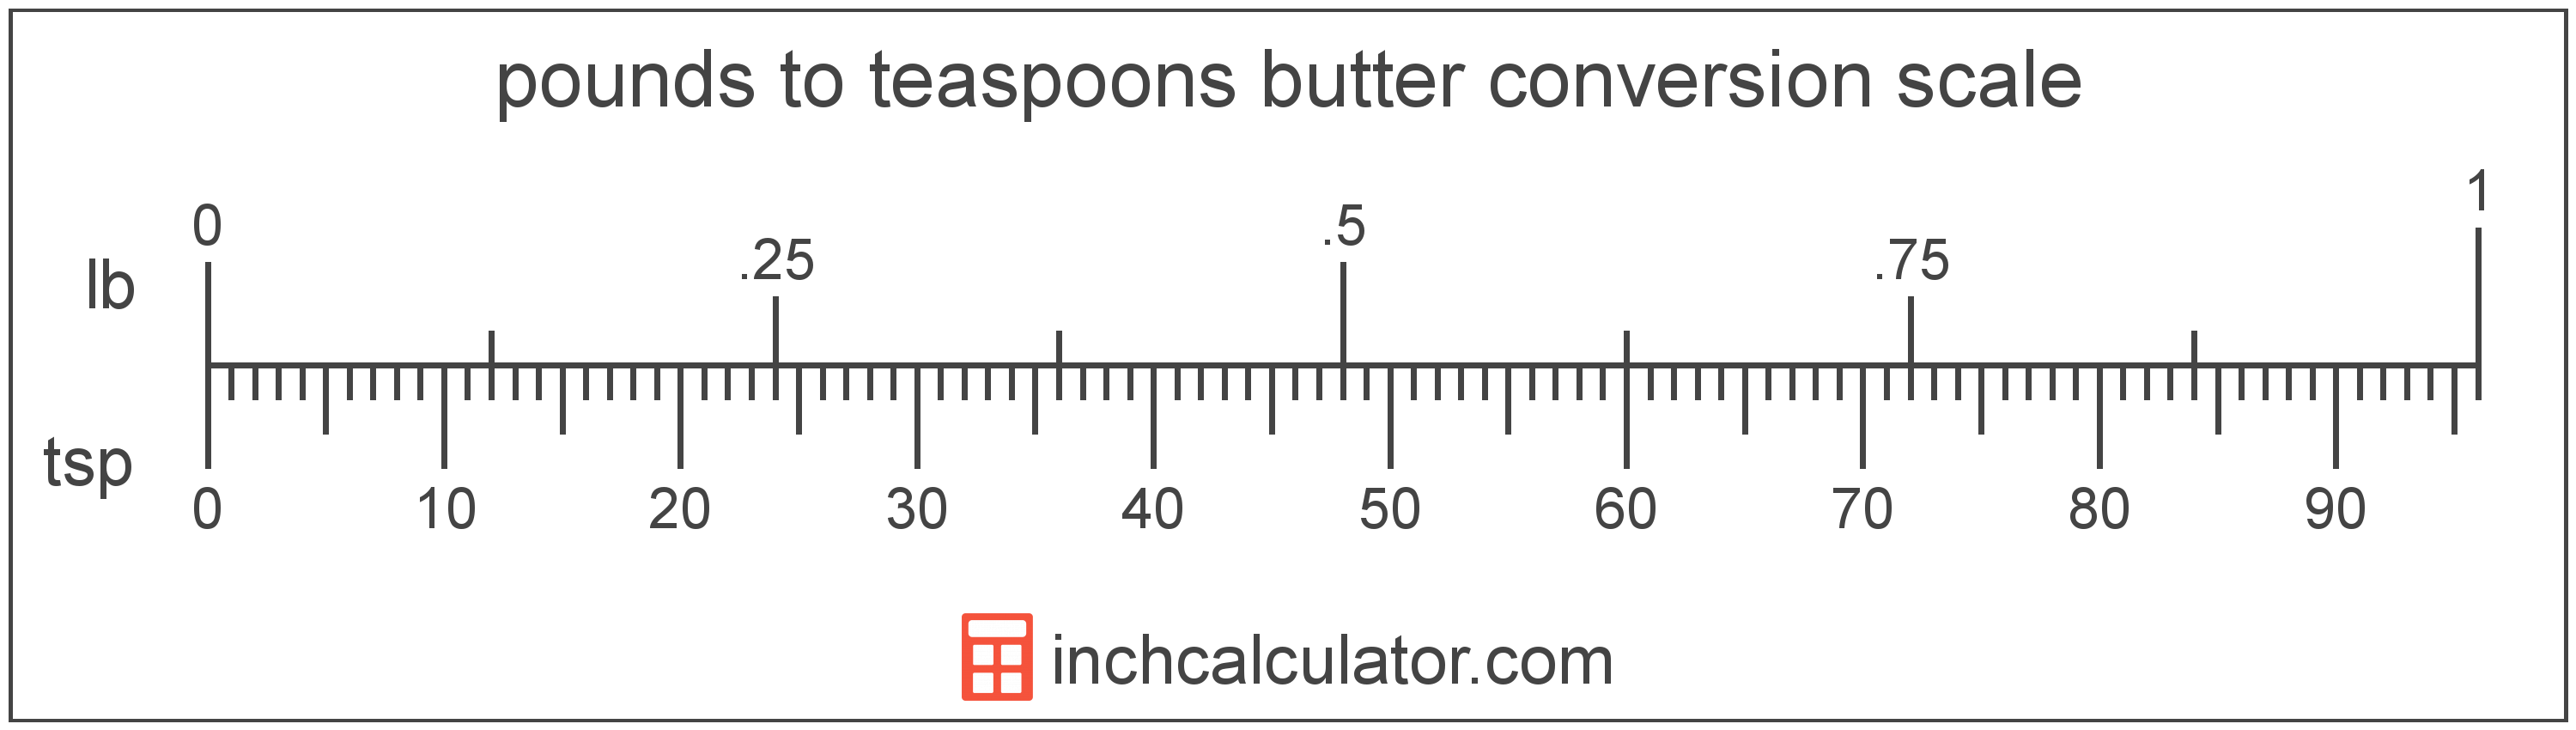 conversion scale showing pounds and equivalent teaspoons butter values